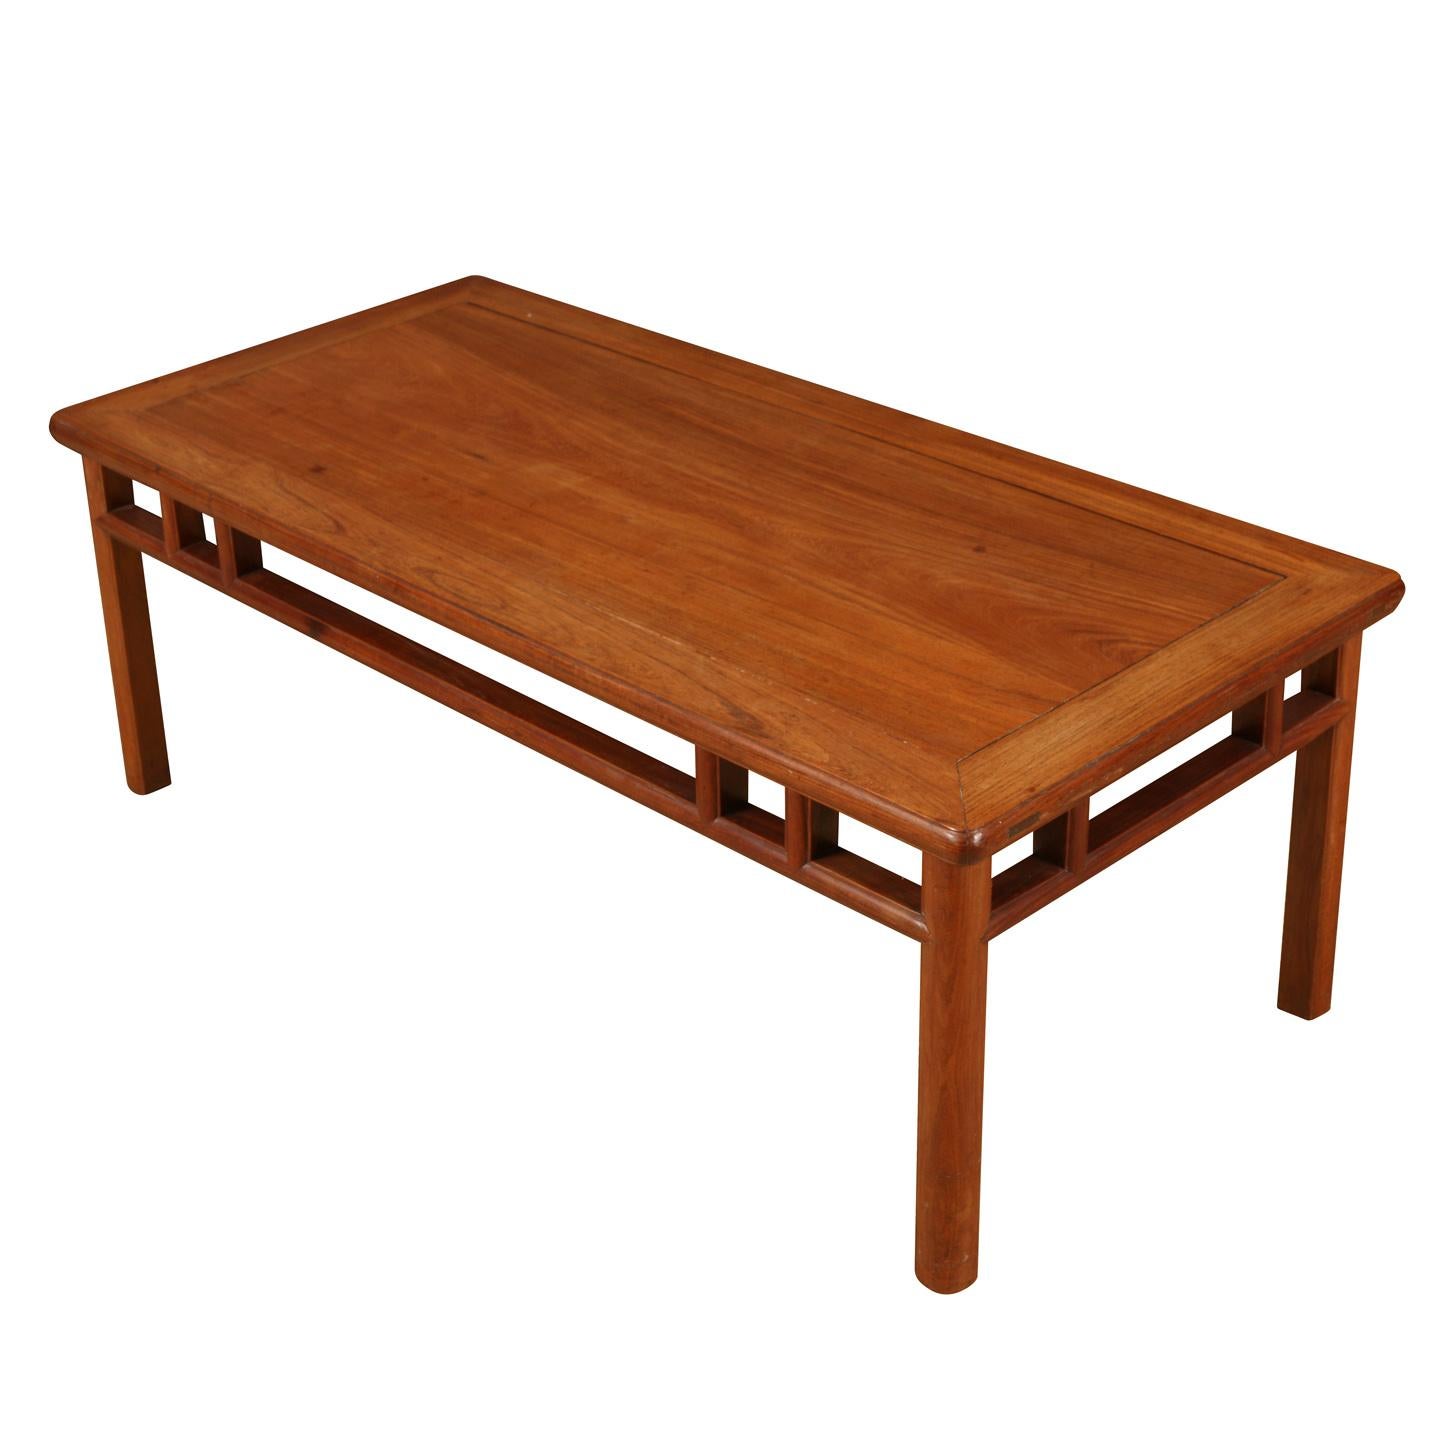 Vintage wood coffee table in Asian style with grid detail to apron.